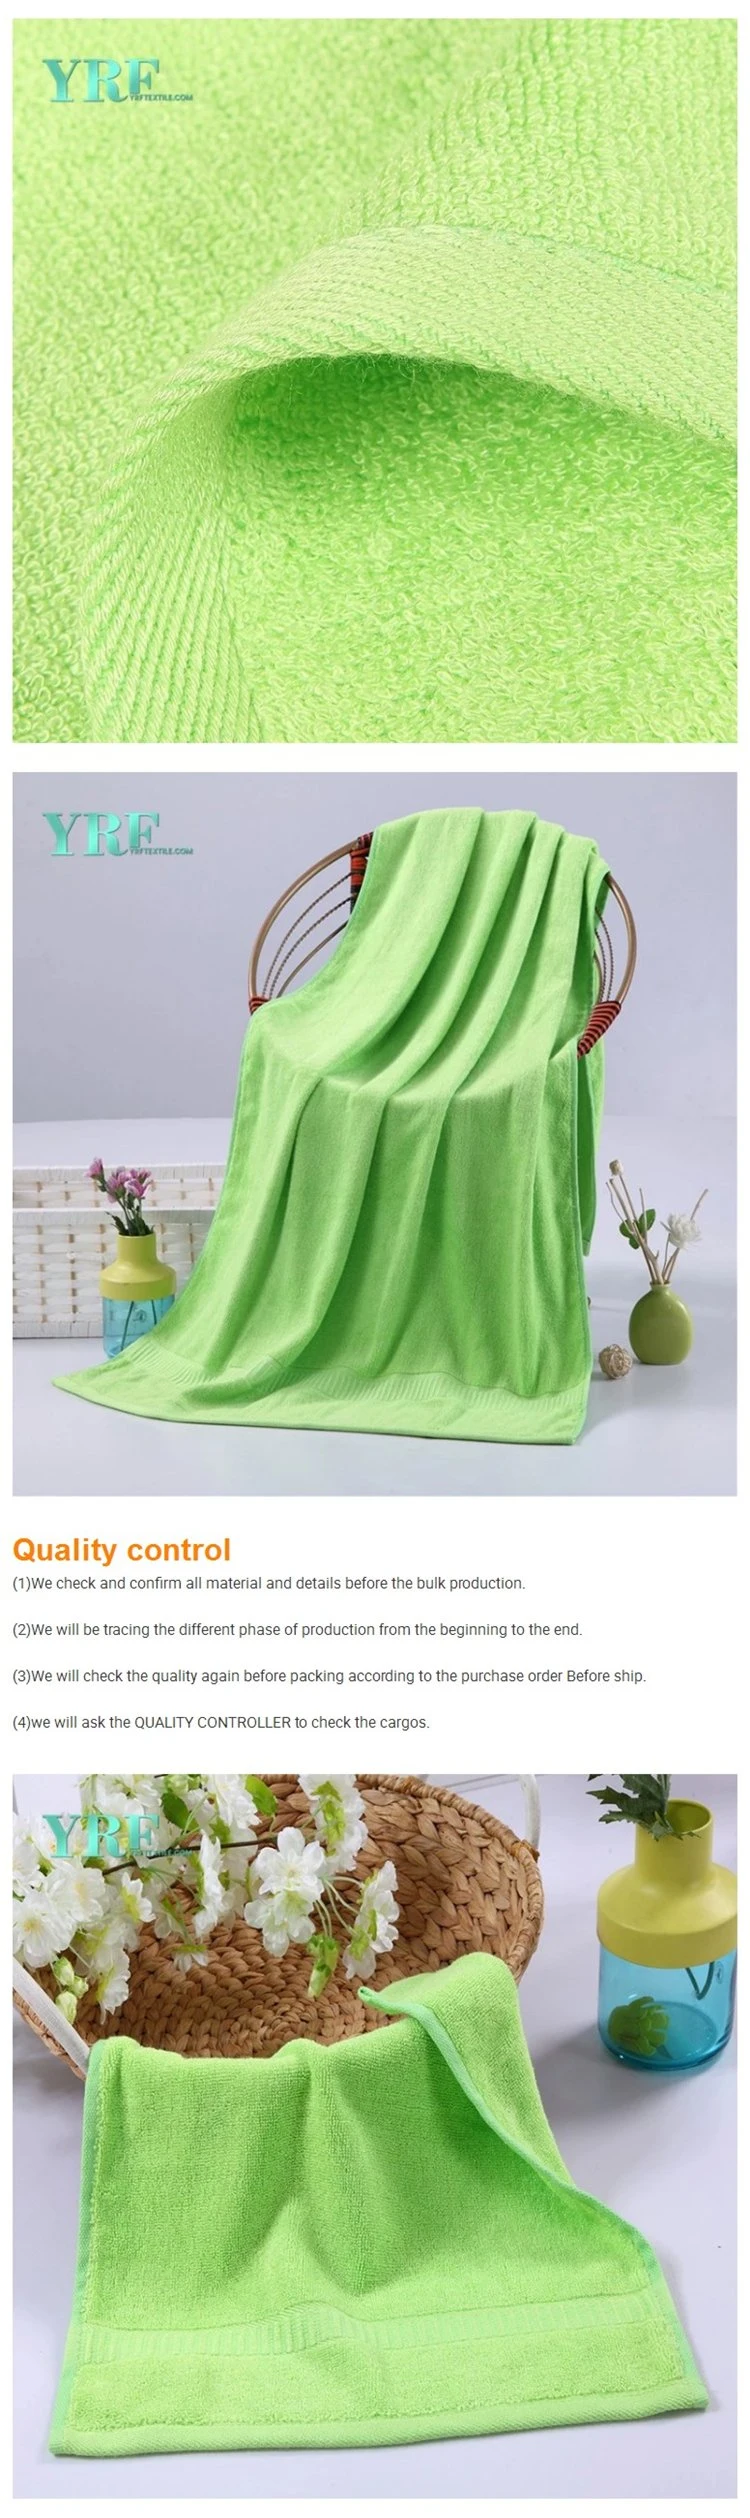 Cheap Price Customized High Quality Comfortable Embroidery Natural Cotton Bath Towel